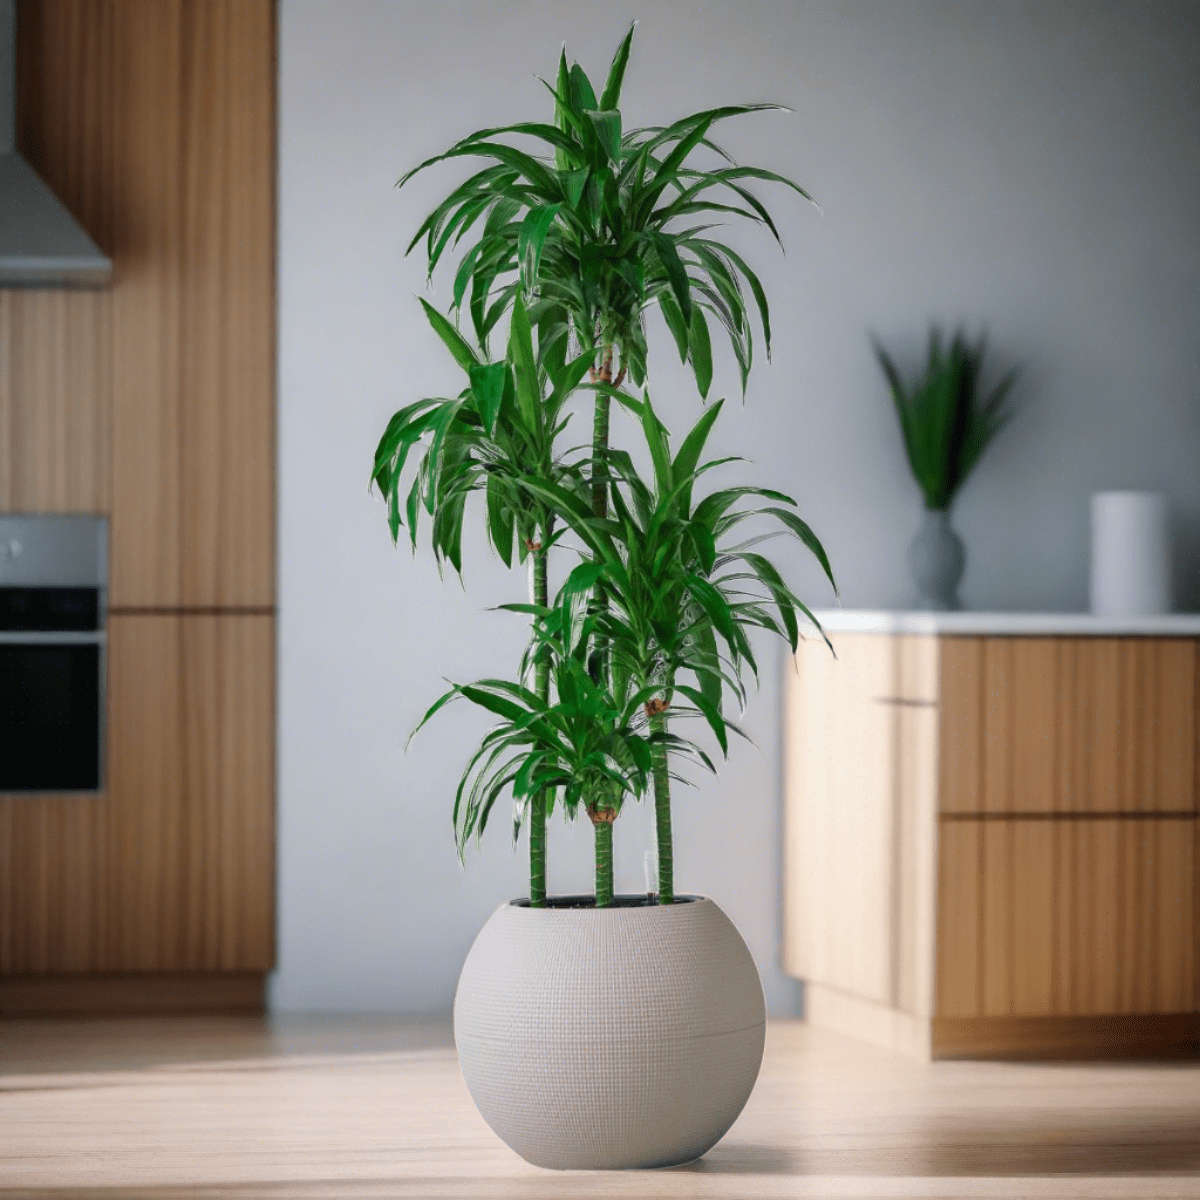 Dracaena Lisa Potted In Lechuza Puro Planter - Sand Brown - My City Plants